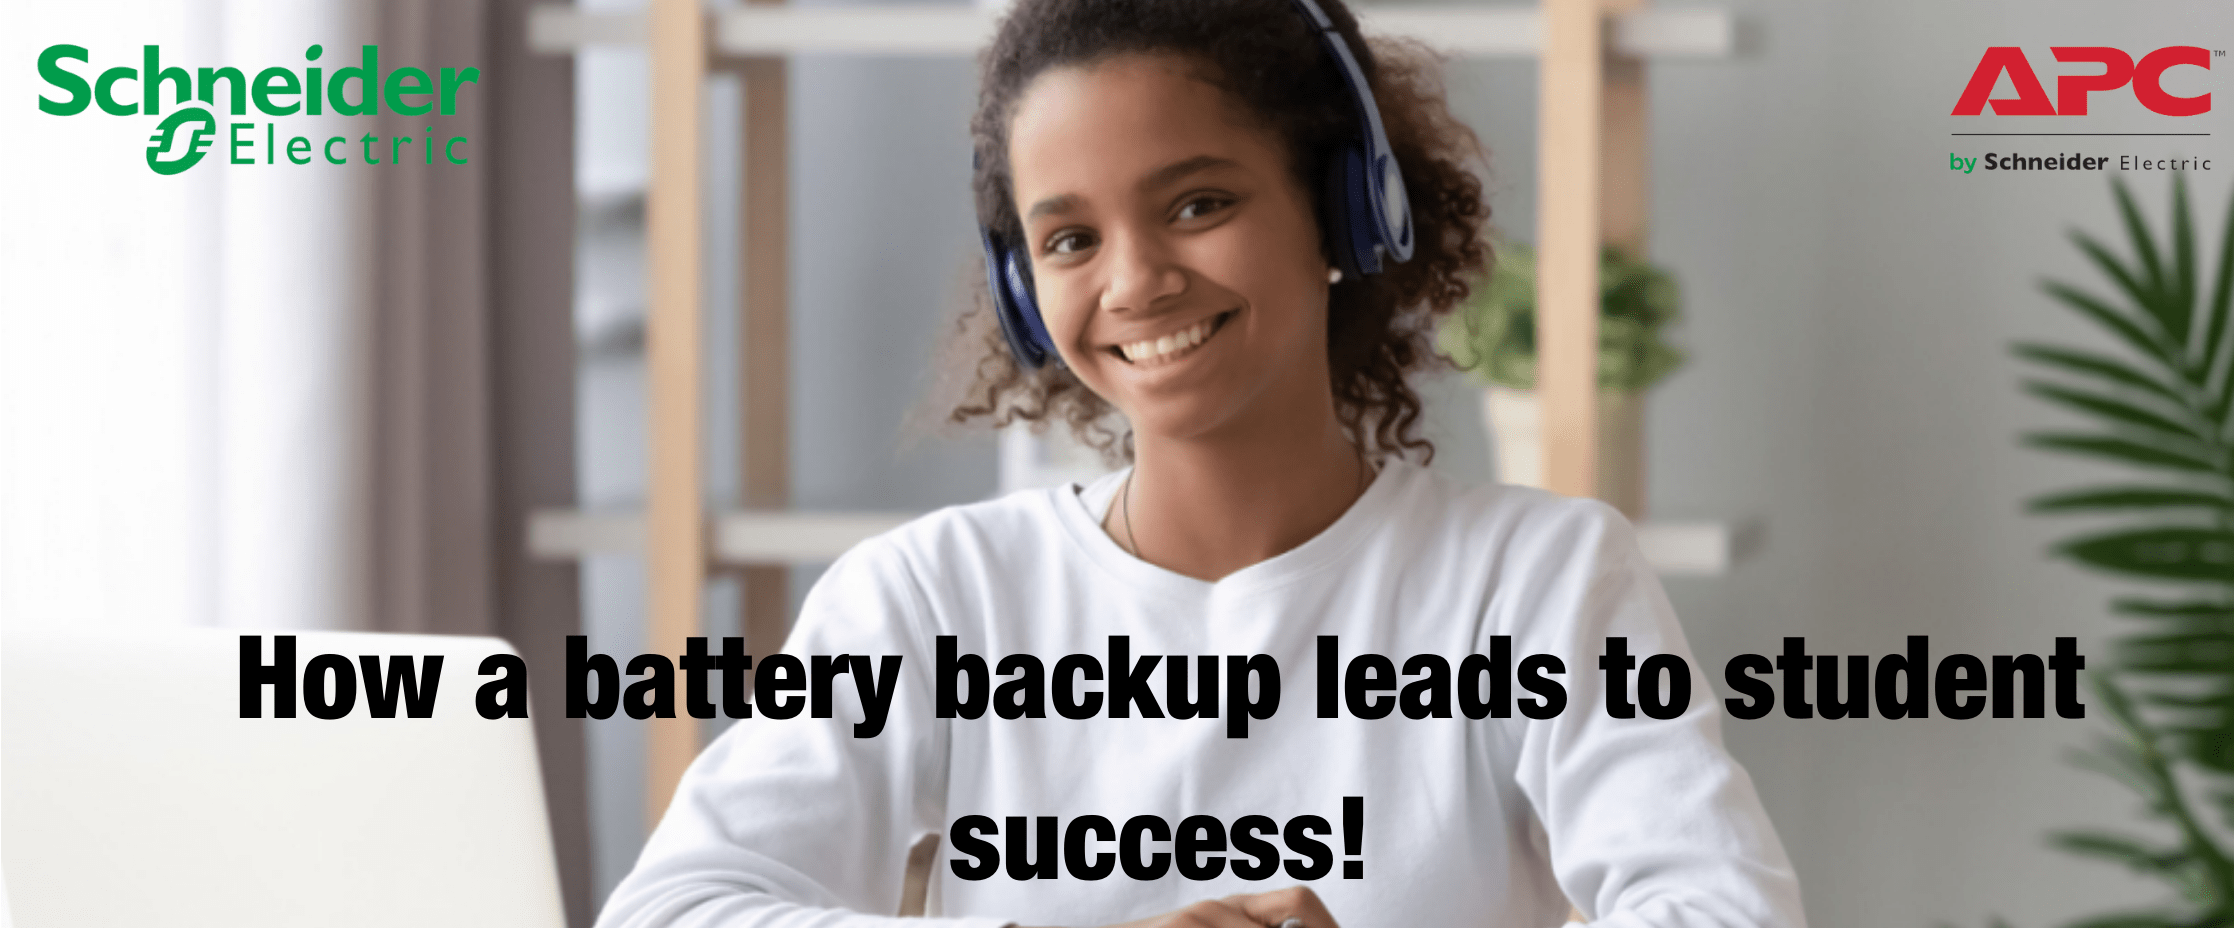 APC Why you need a battery back-up for student success header